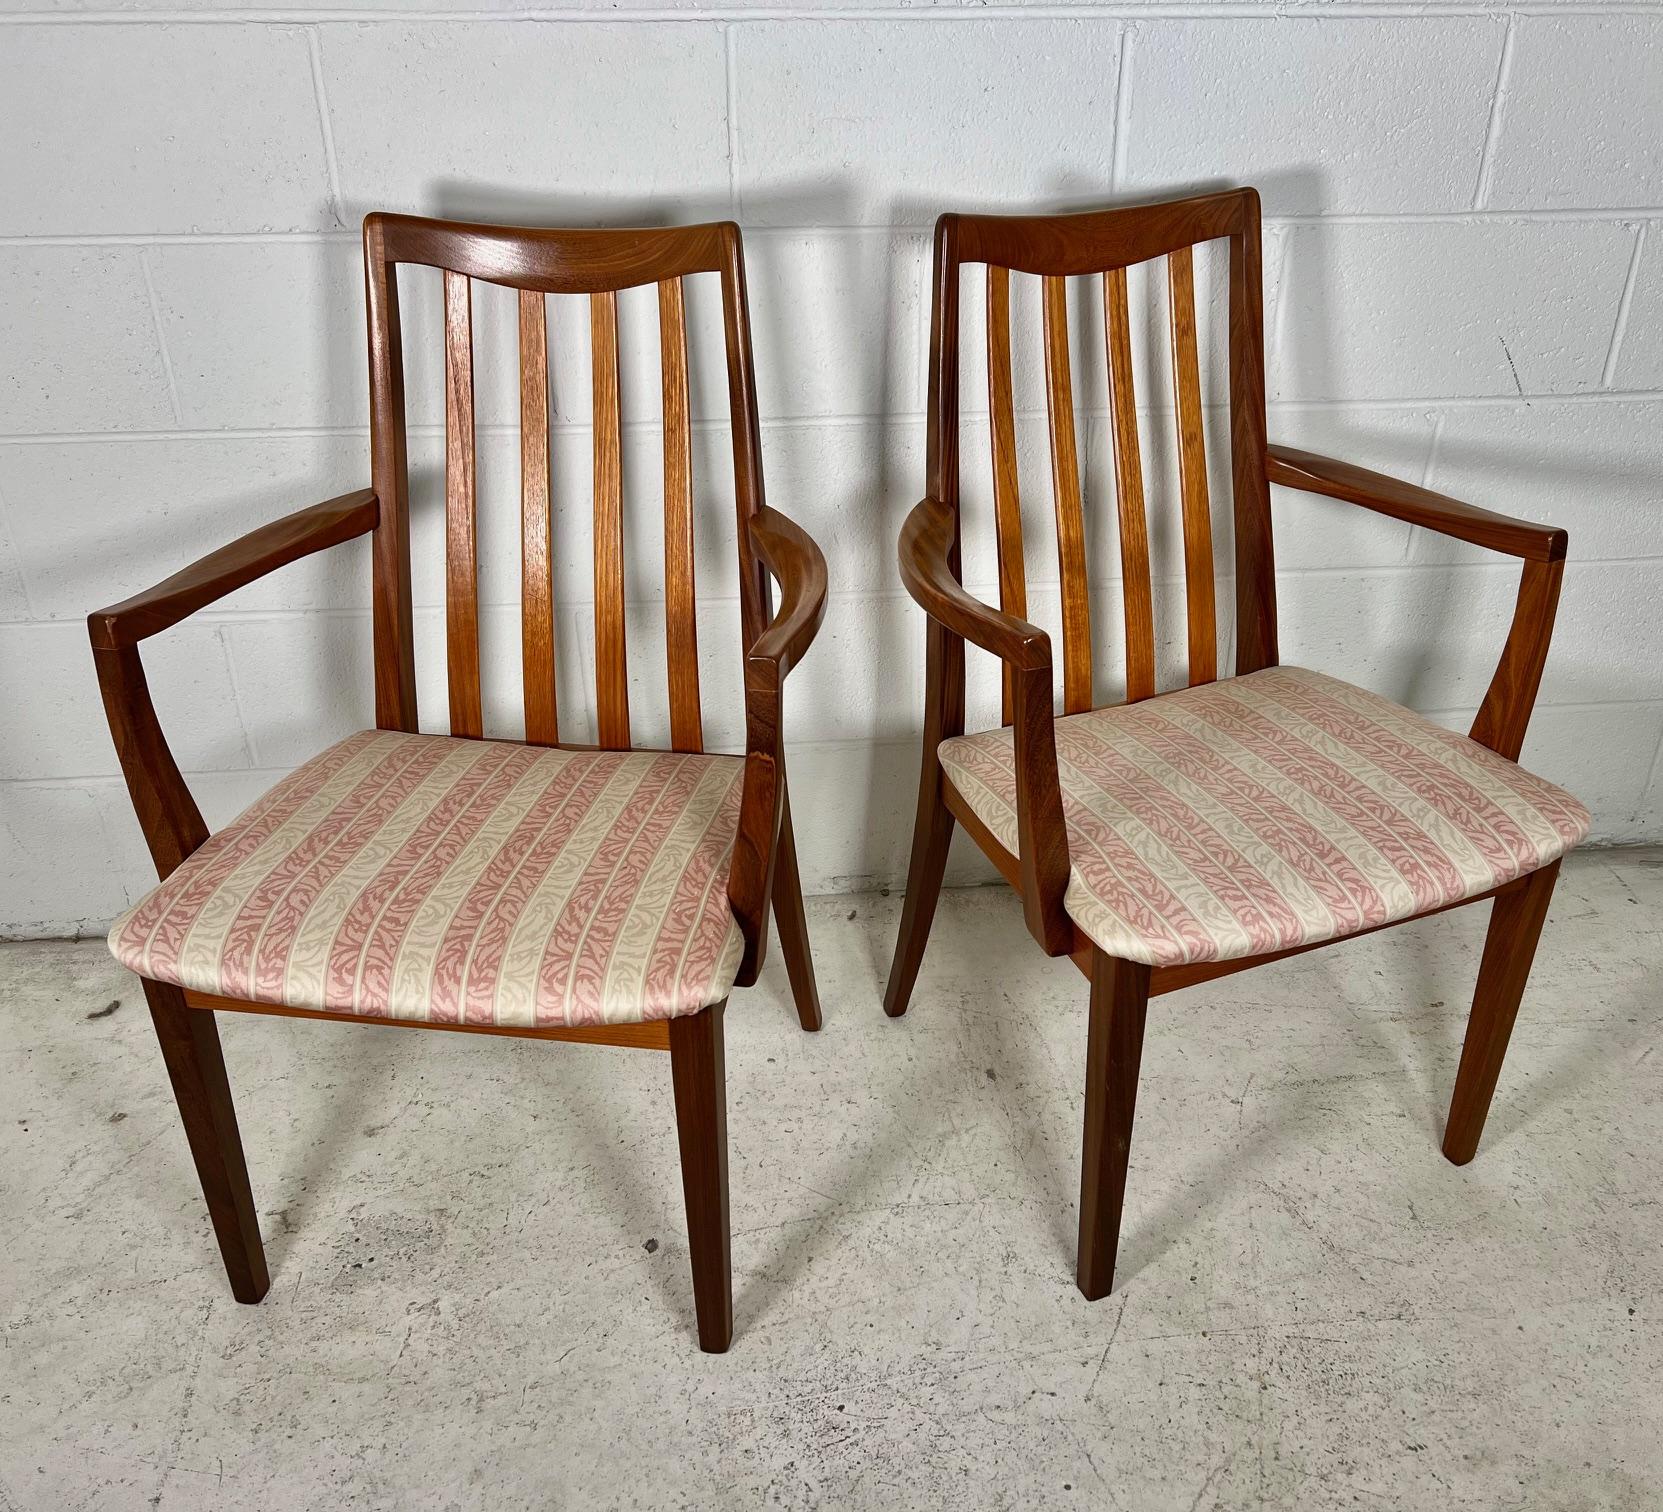 Set Of 6 Mid Century Modern Teak Chairs By G Plan Slat Back  2 With Arms 11